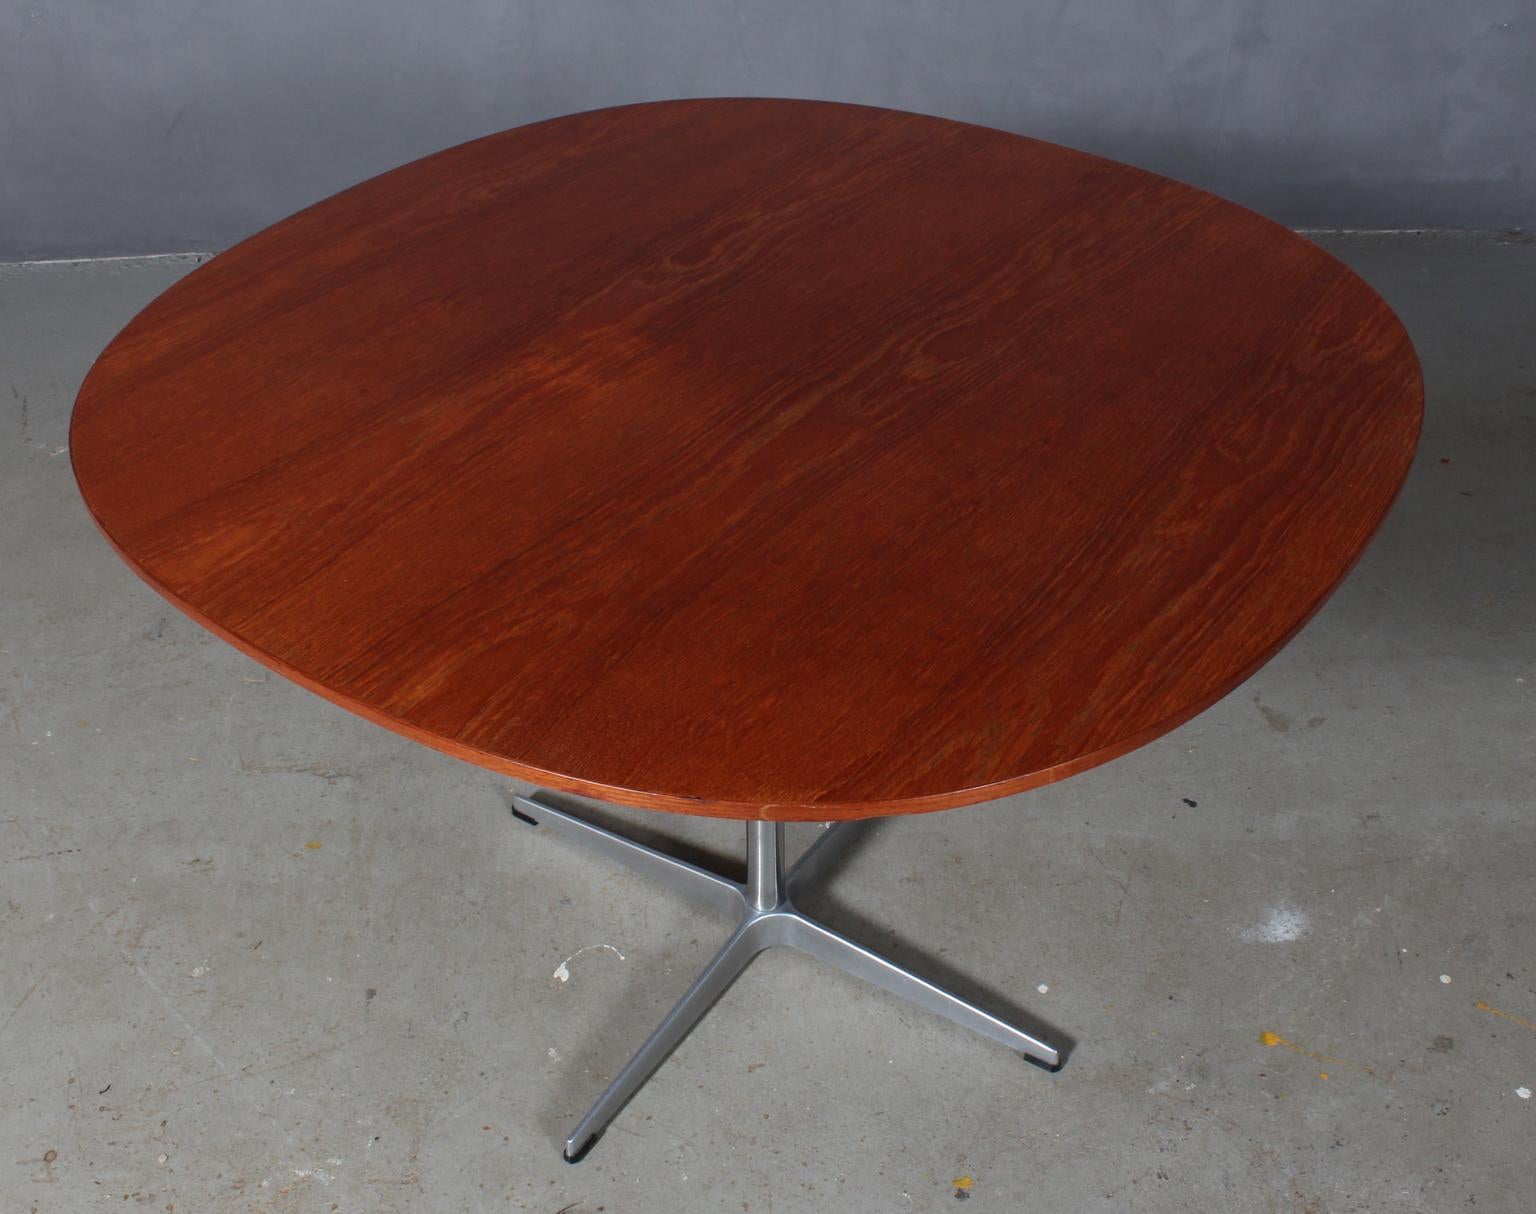 Piet Hein & Arne Jacobsen café table with plate of veneered teak.

Four star base of aluminium and steel.

Made by Fritz Hansen.